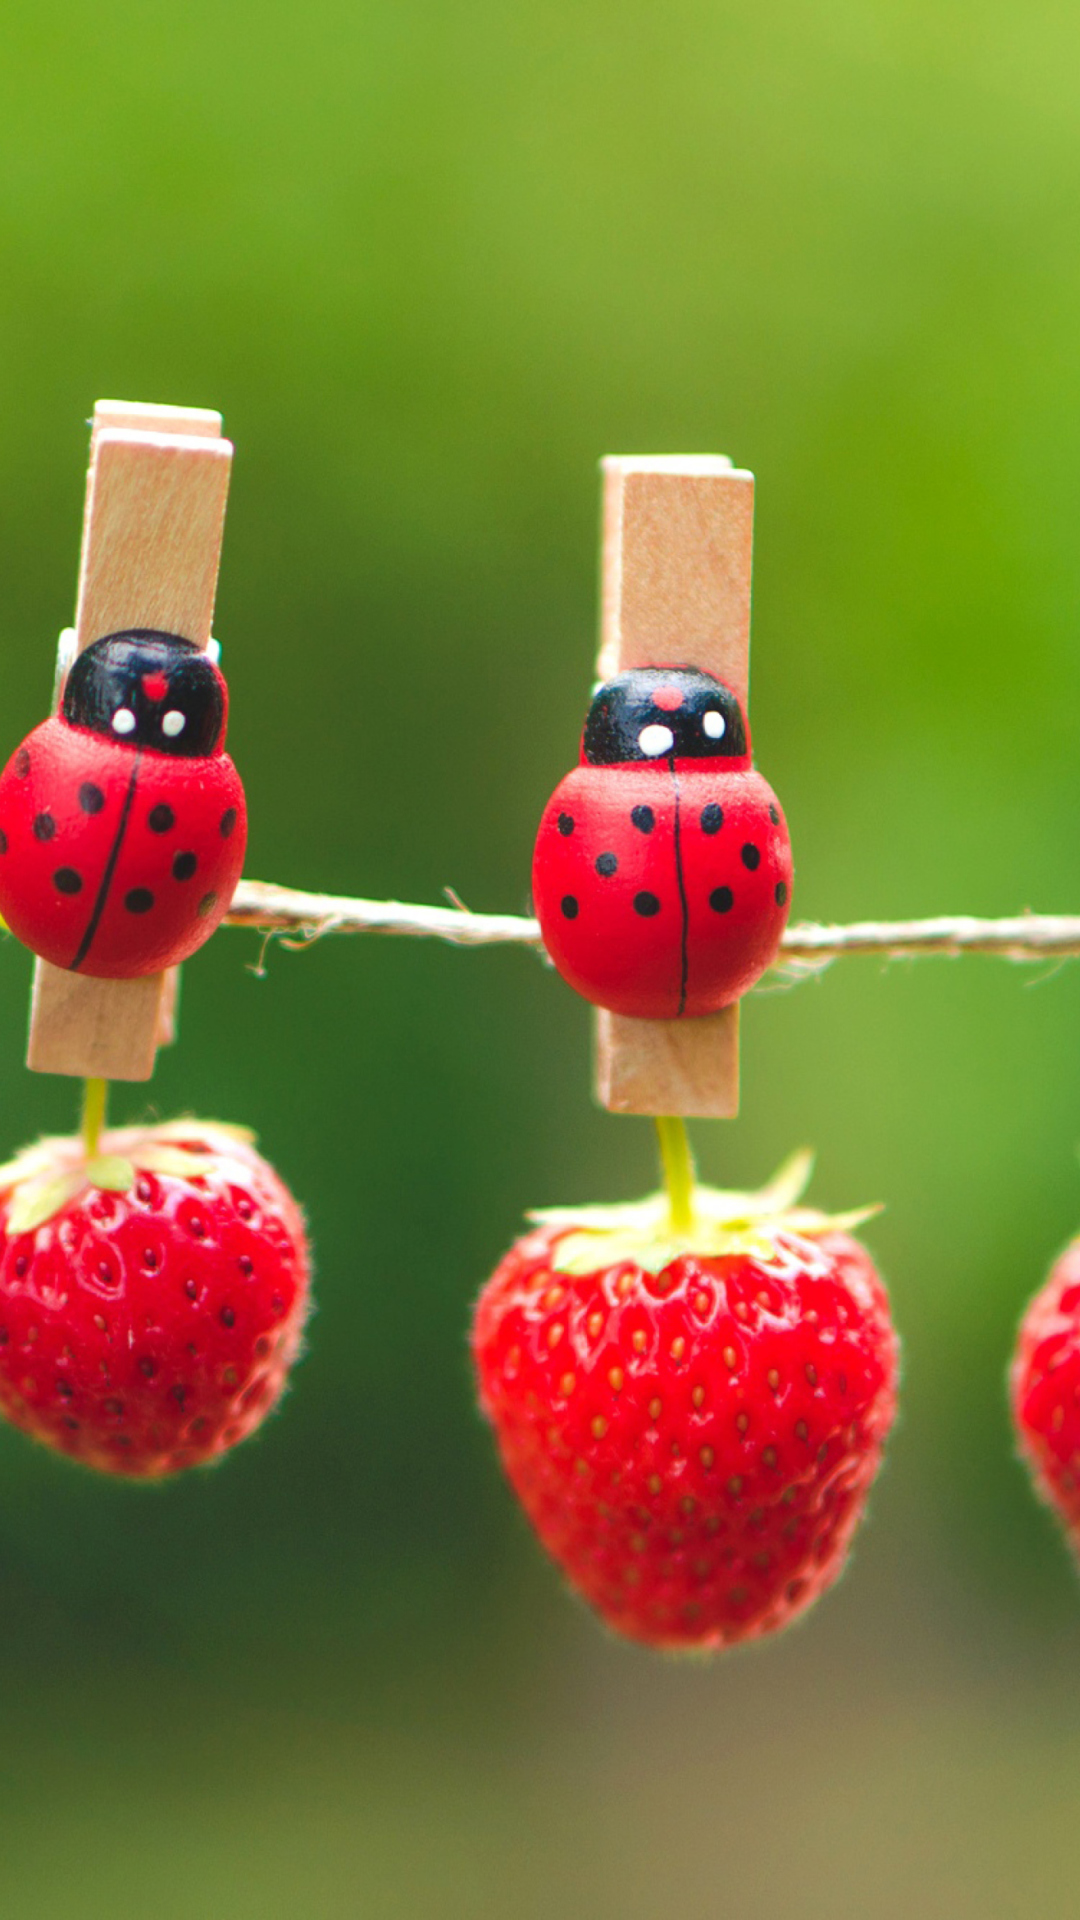 Ladybugs And Strawberries wallpaper 1080x1920